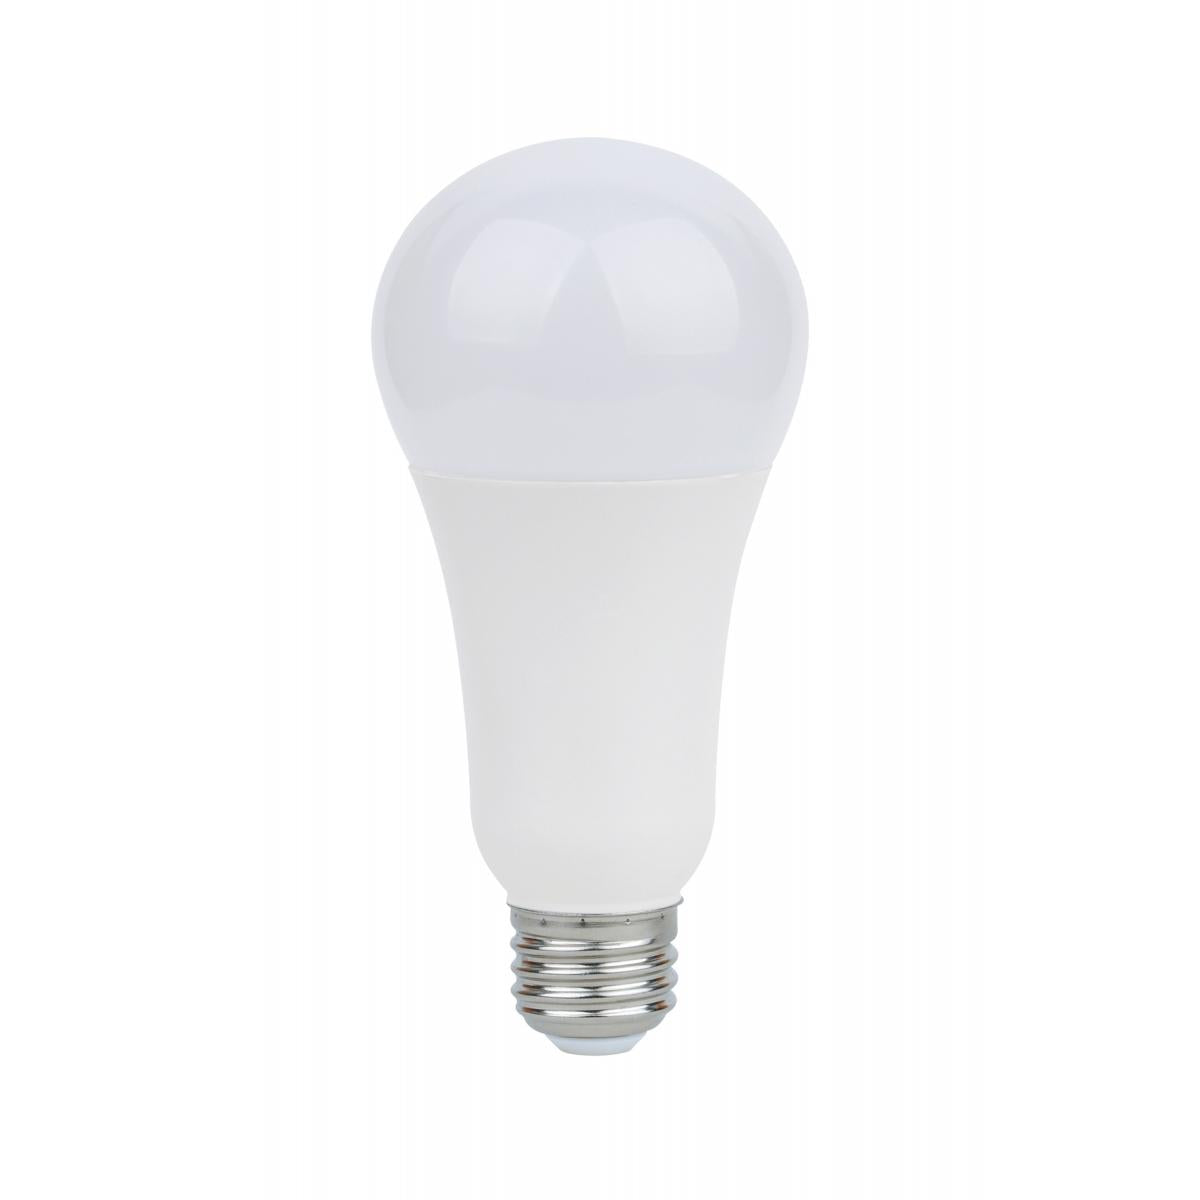 Replacement for Bulbrite 100151 150A/HL Incandescent 150W A21 FROST HL 120V - NOW LED S11329